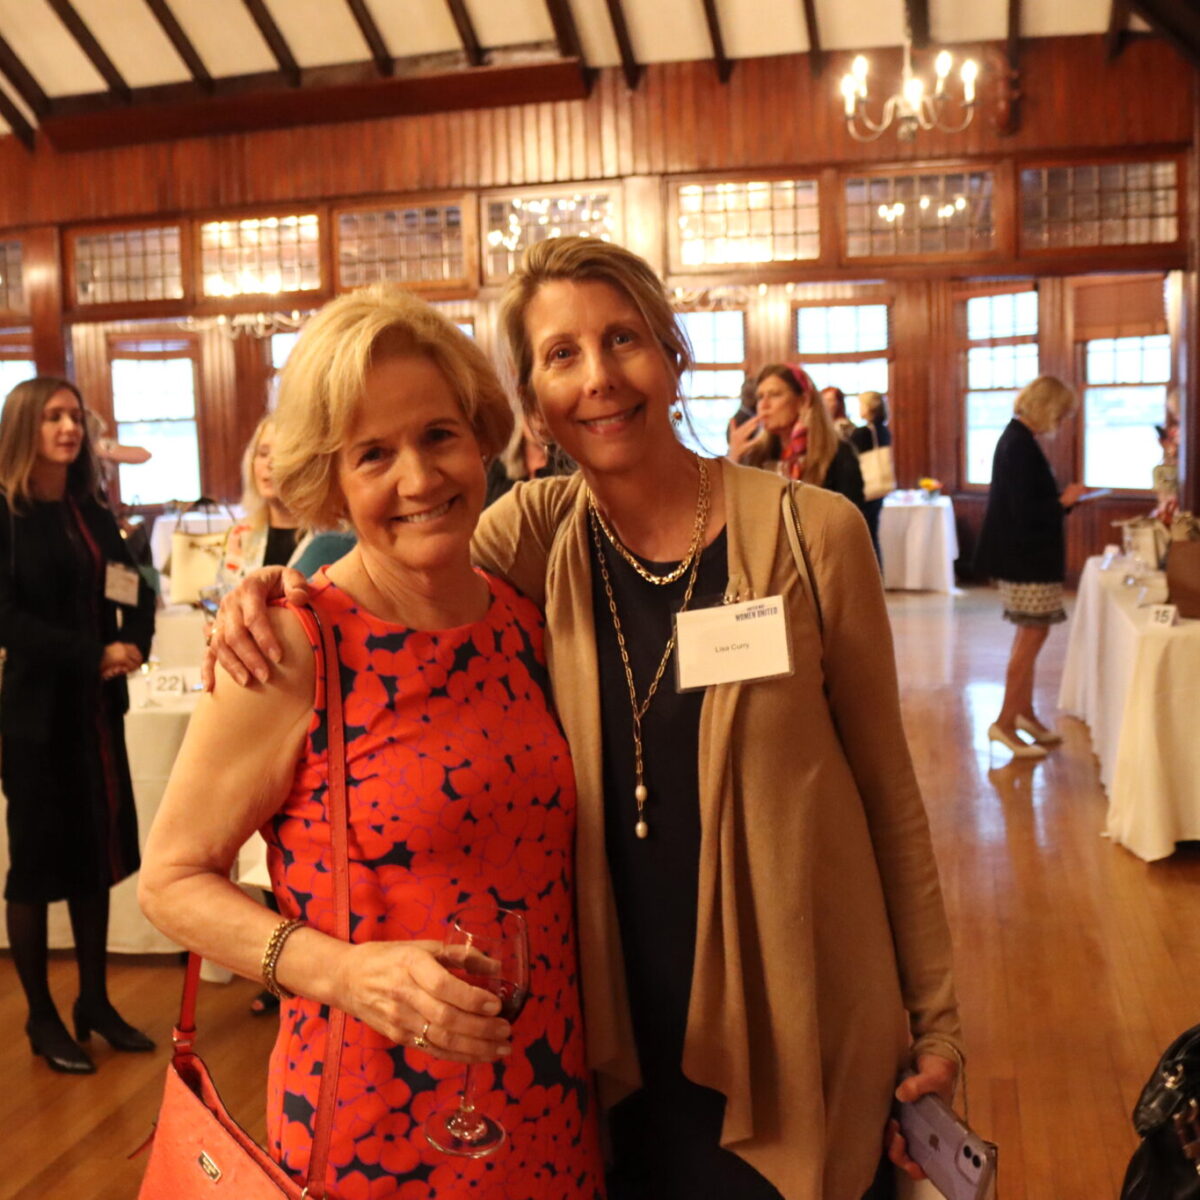 Peggy Lamb, outgoing chair of the Women United Executive Committee, poses with Lisa Curry.